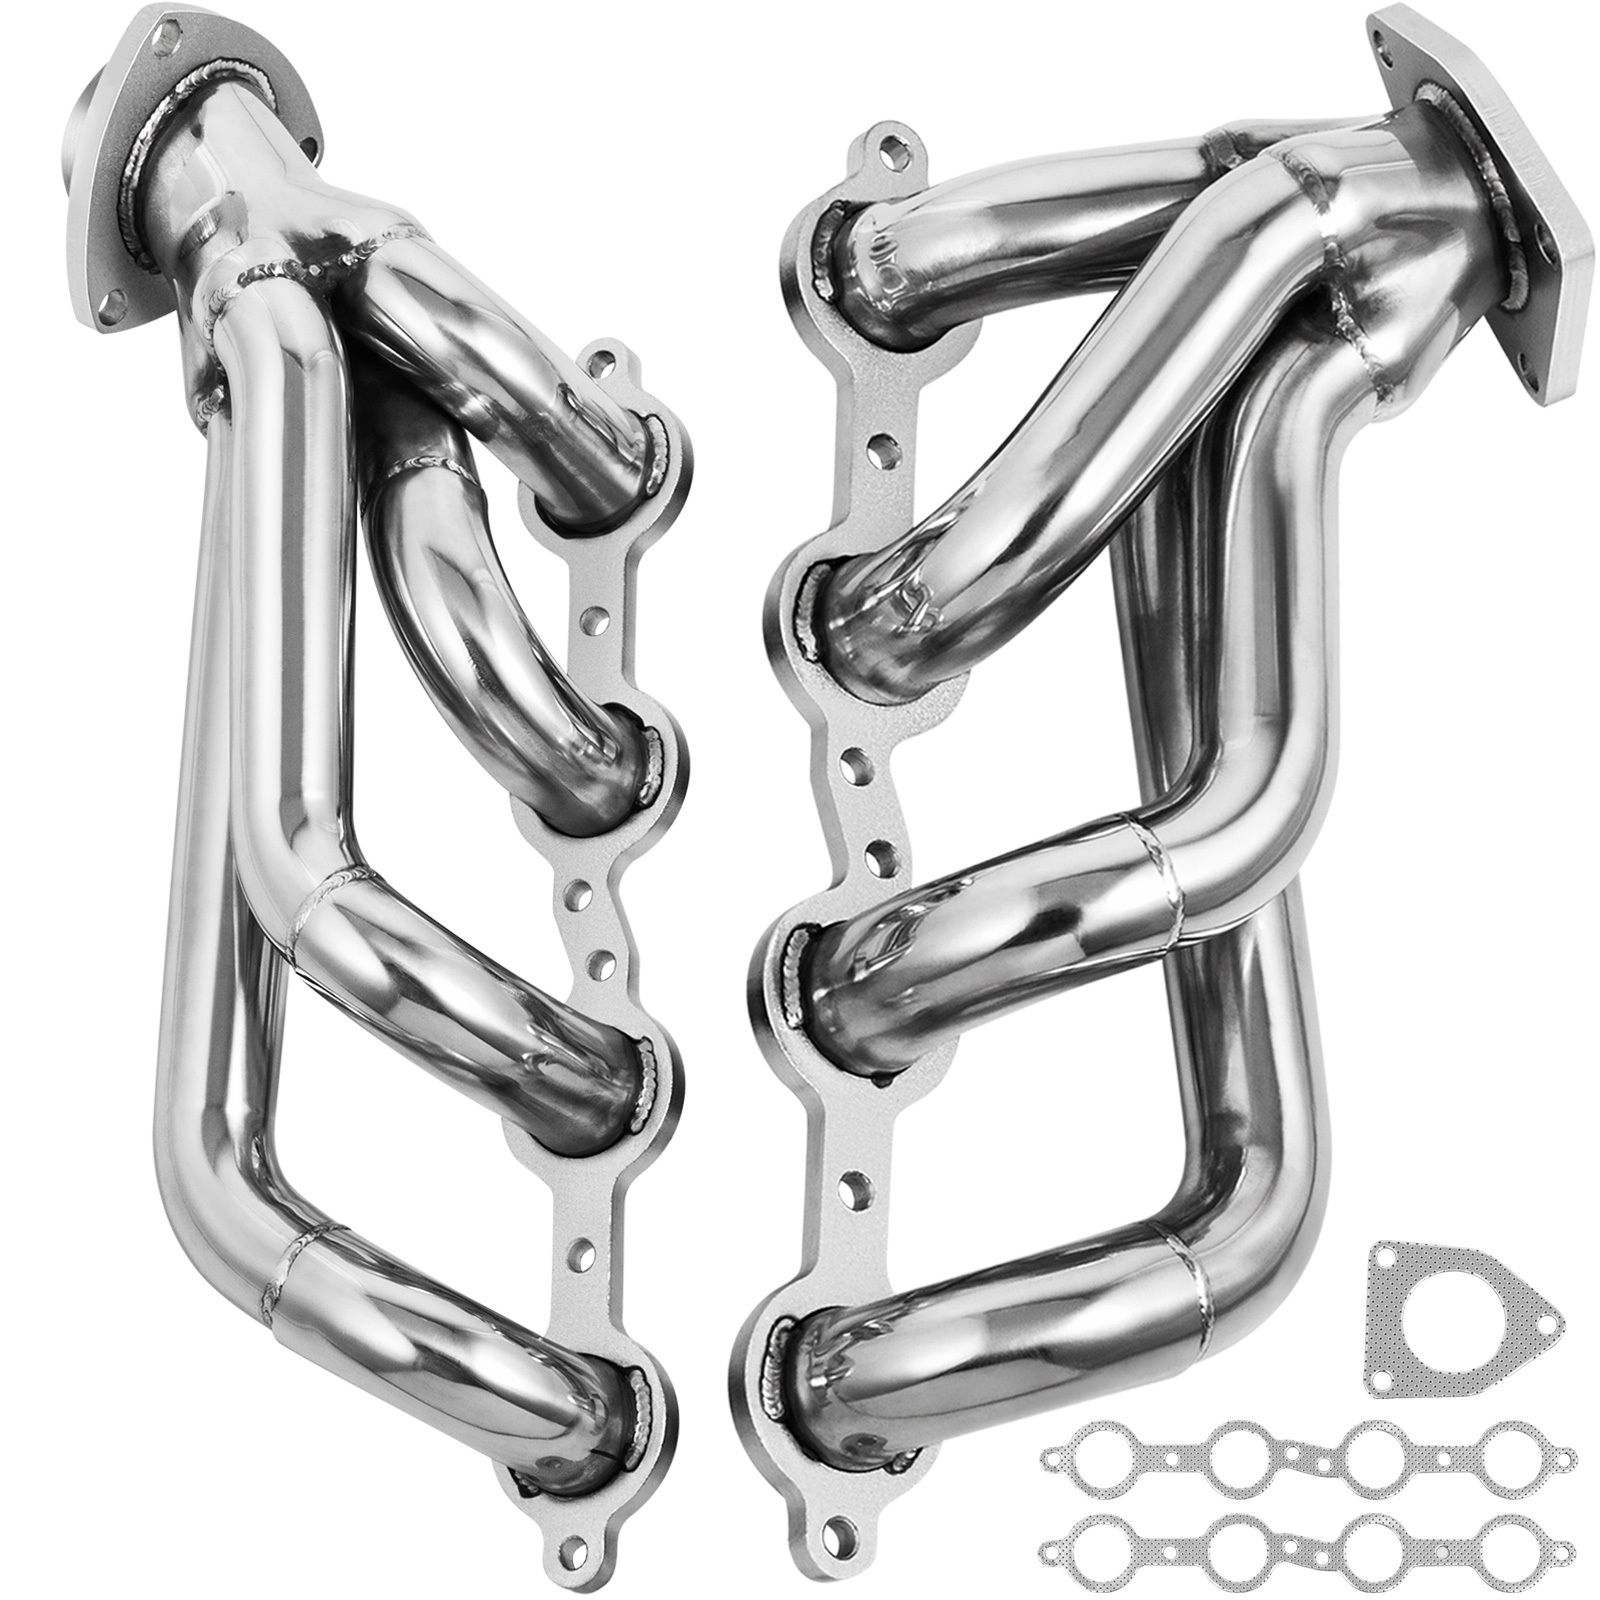 2.25" Outlet Exhaust Header for GMC Yukon 4.8L 5.3L for GMC Sierra 1500 99-01 от Vevor Many GEOs